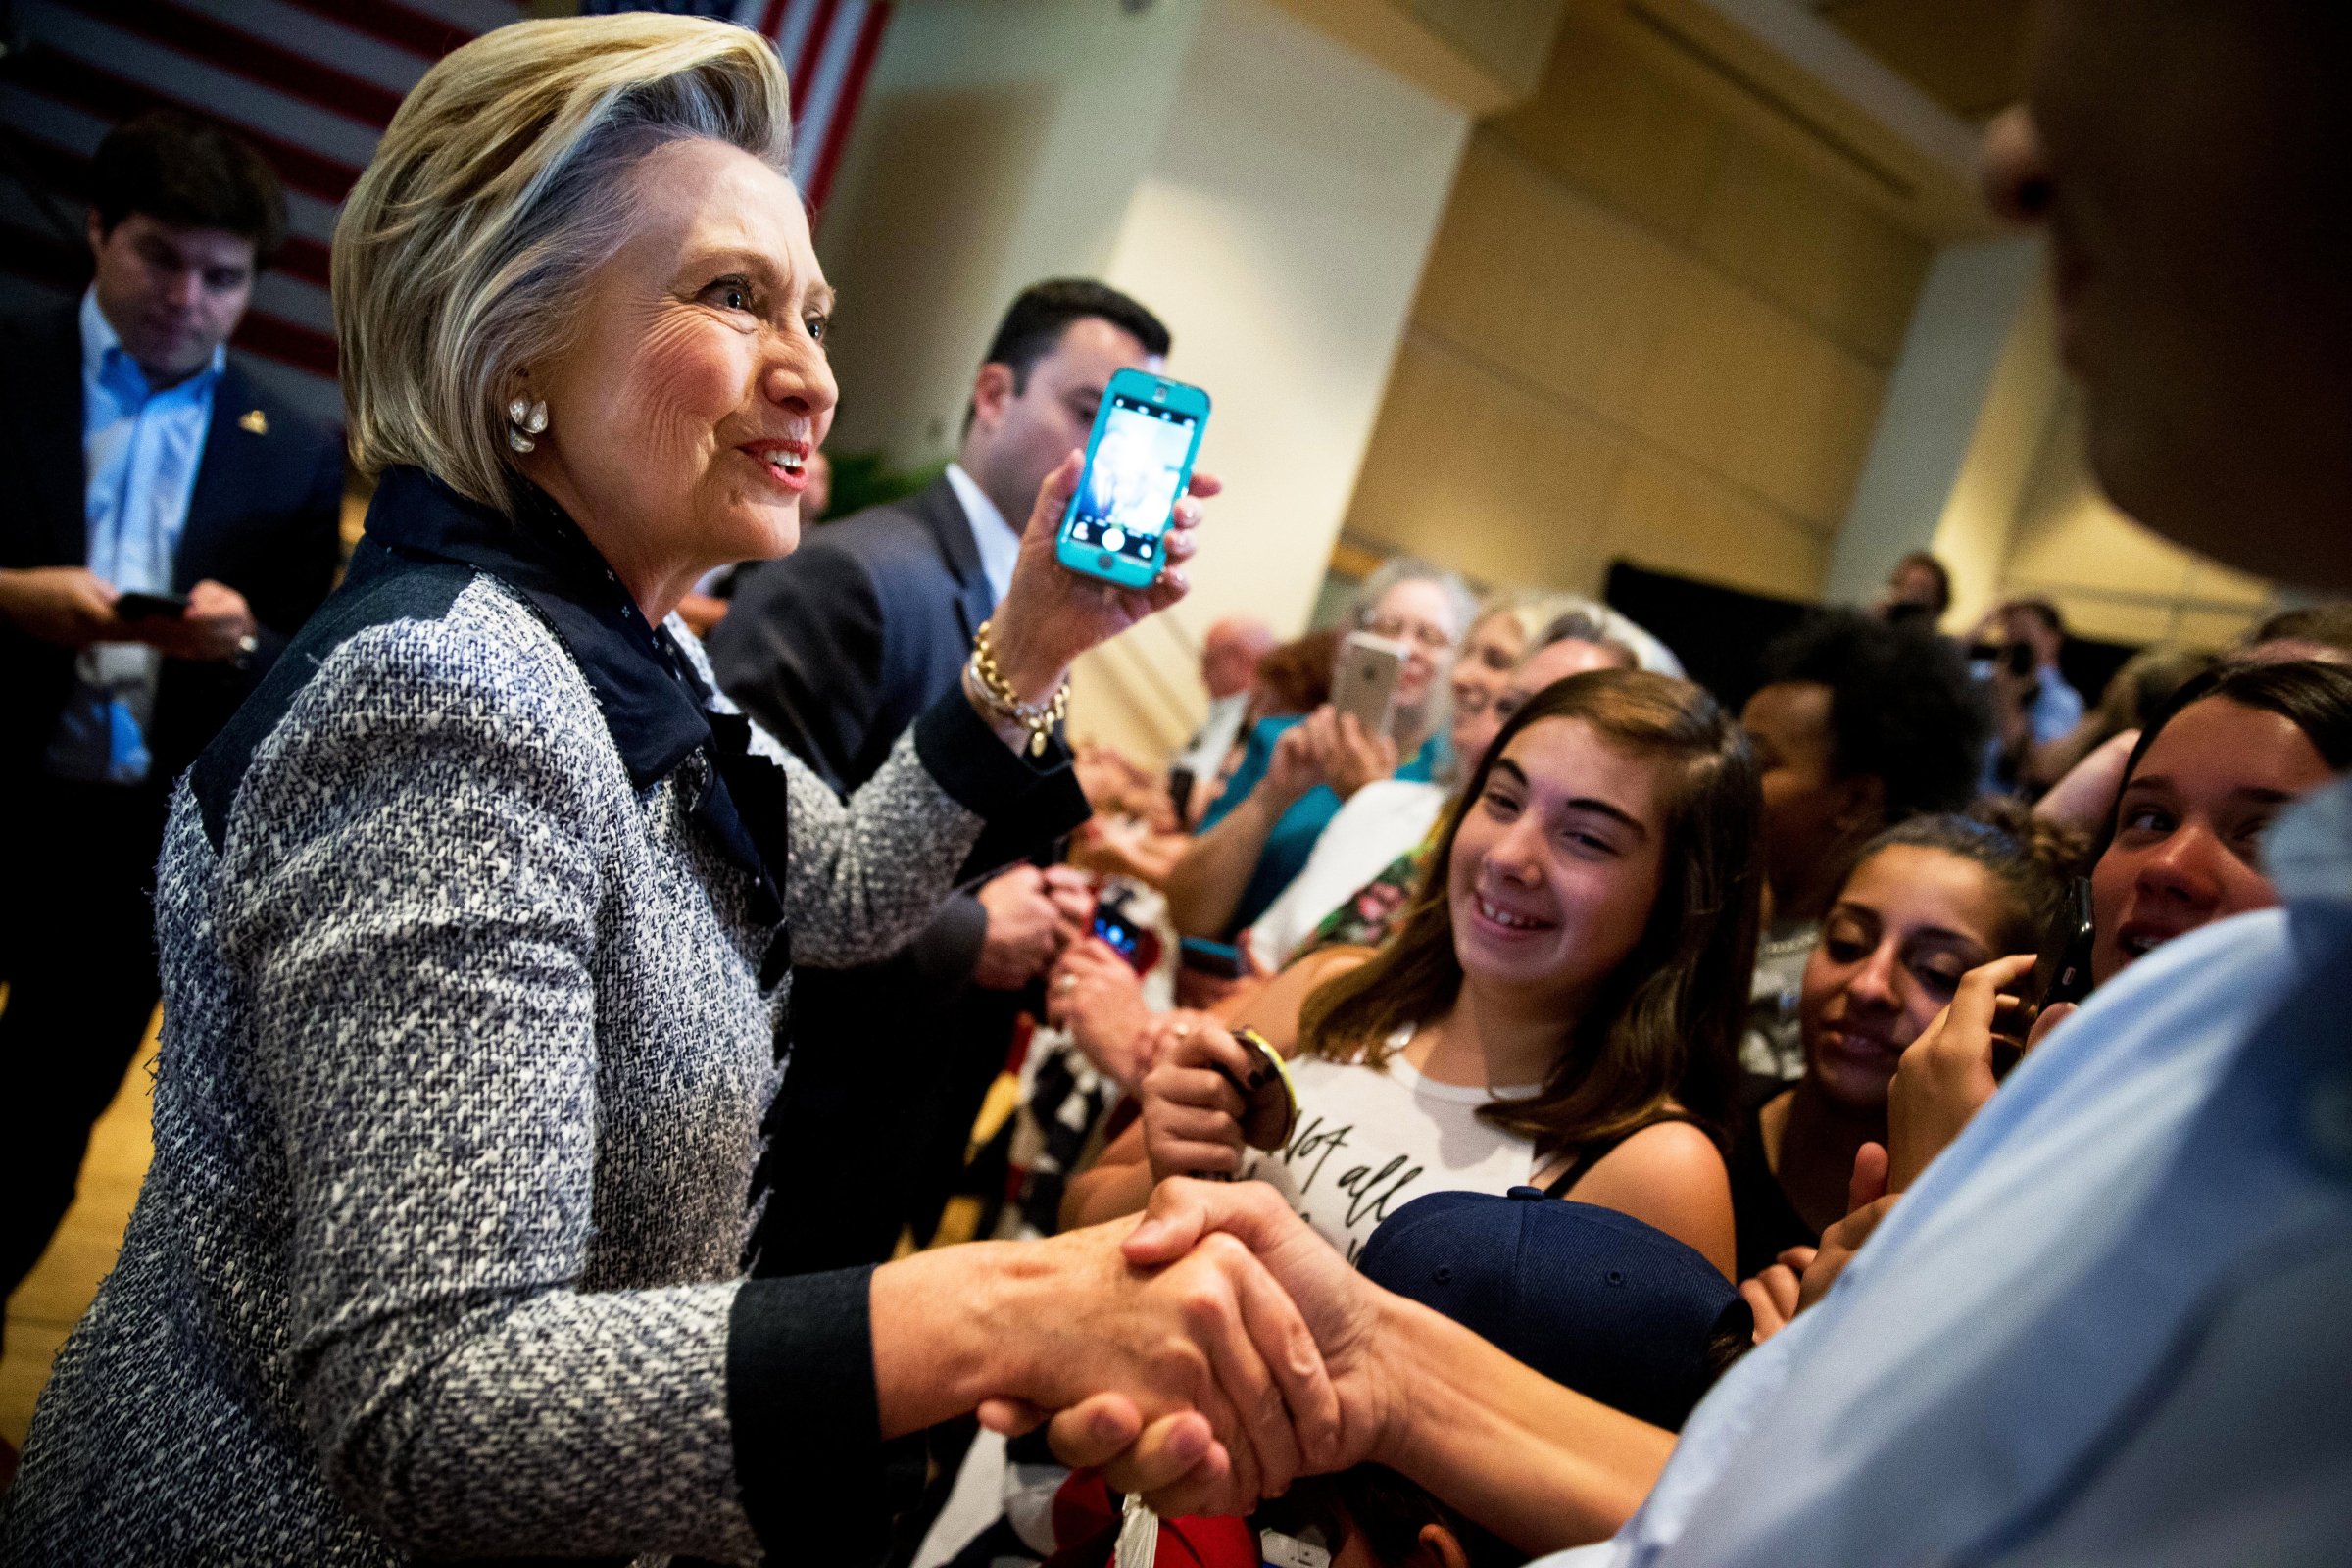 Hillary Clinton greets members of the audience after speaking at a rally at the International Brotherhood of Electrical Workers Circuit Center in Pittsburgh on June 14, 2016.